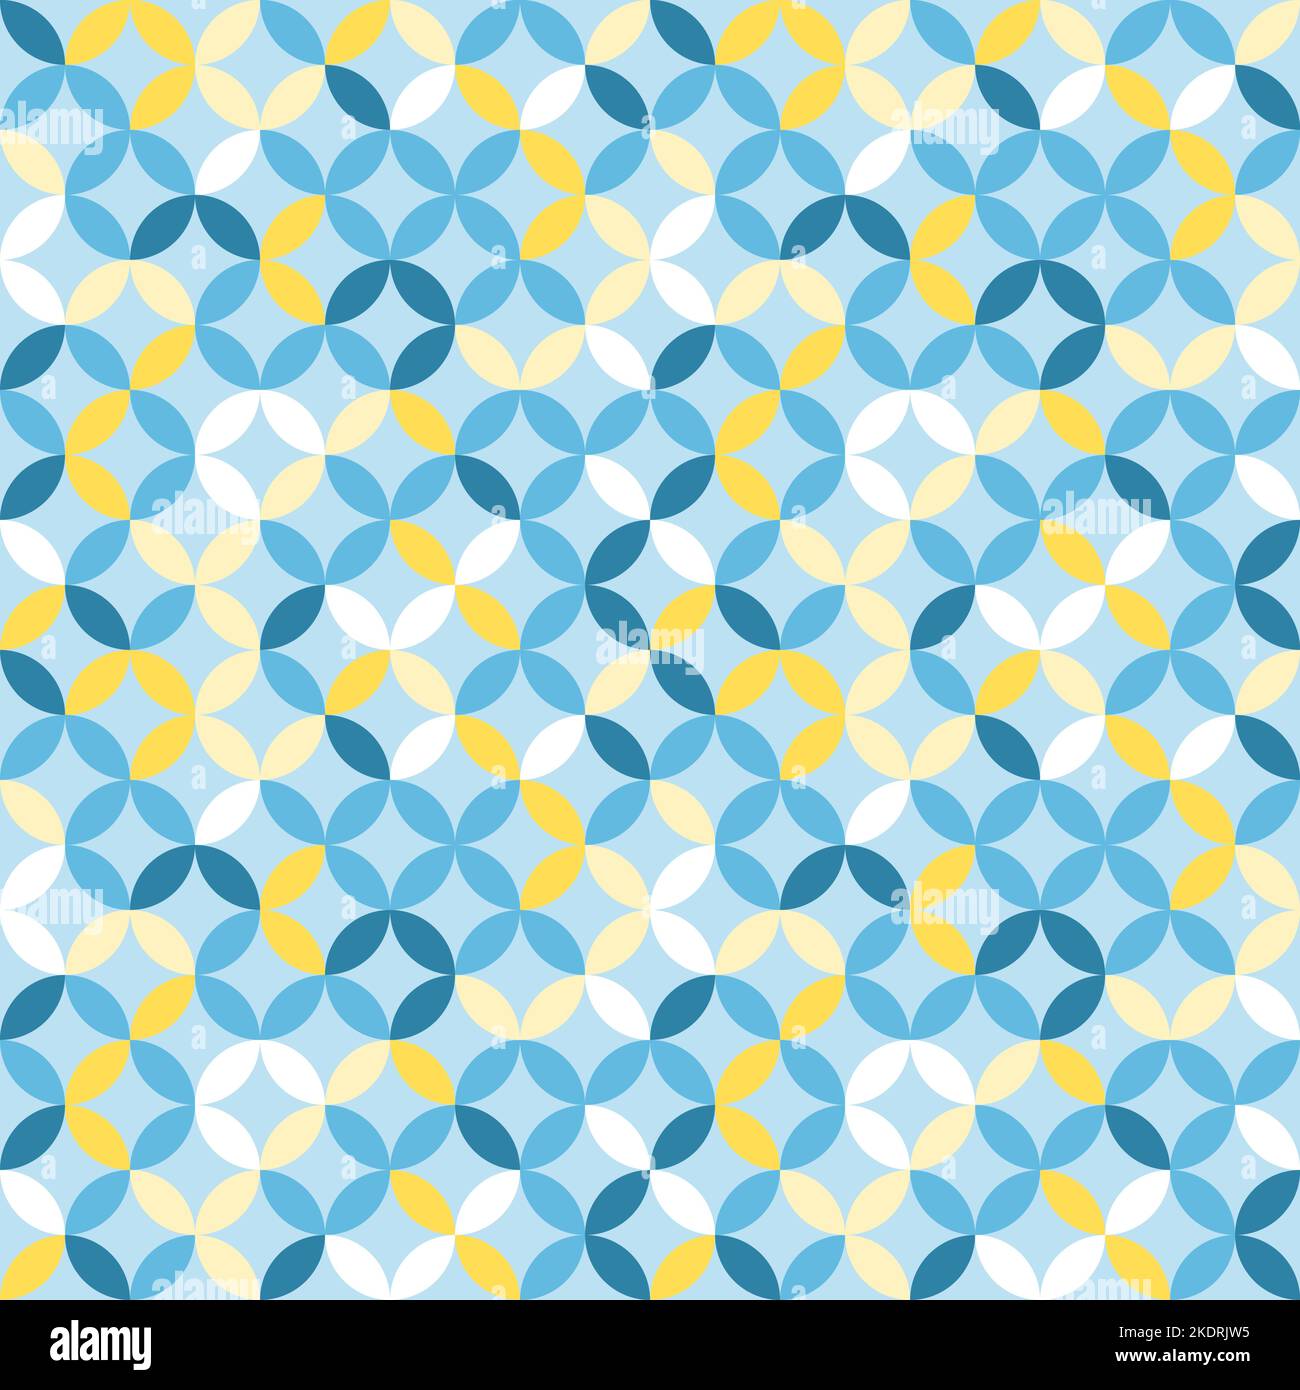 Blue geometric pattern. Interconnecting circles and ovals abstract retro fashion texture. Seamless pattern. Blue, white and yellow. Stock Vector